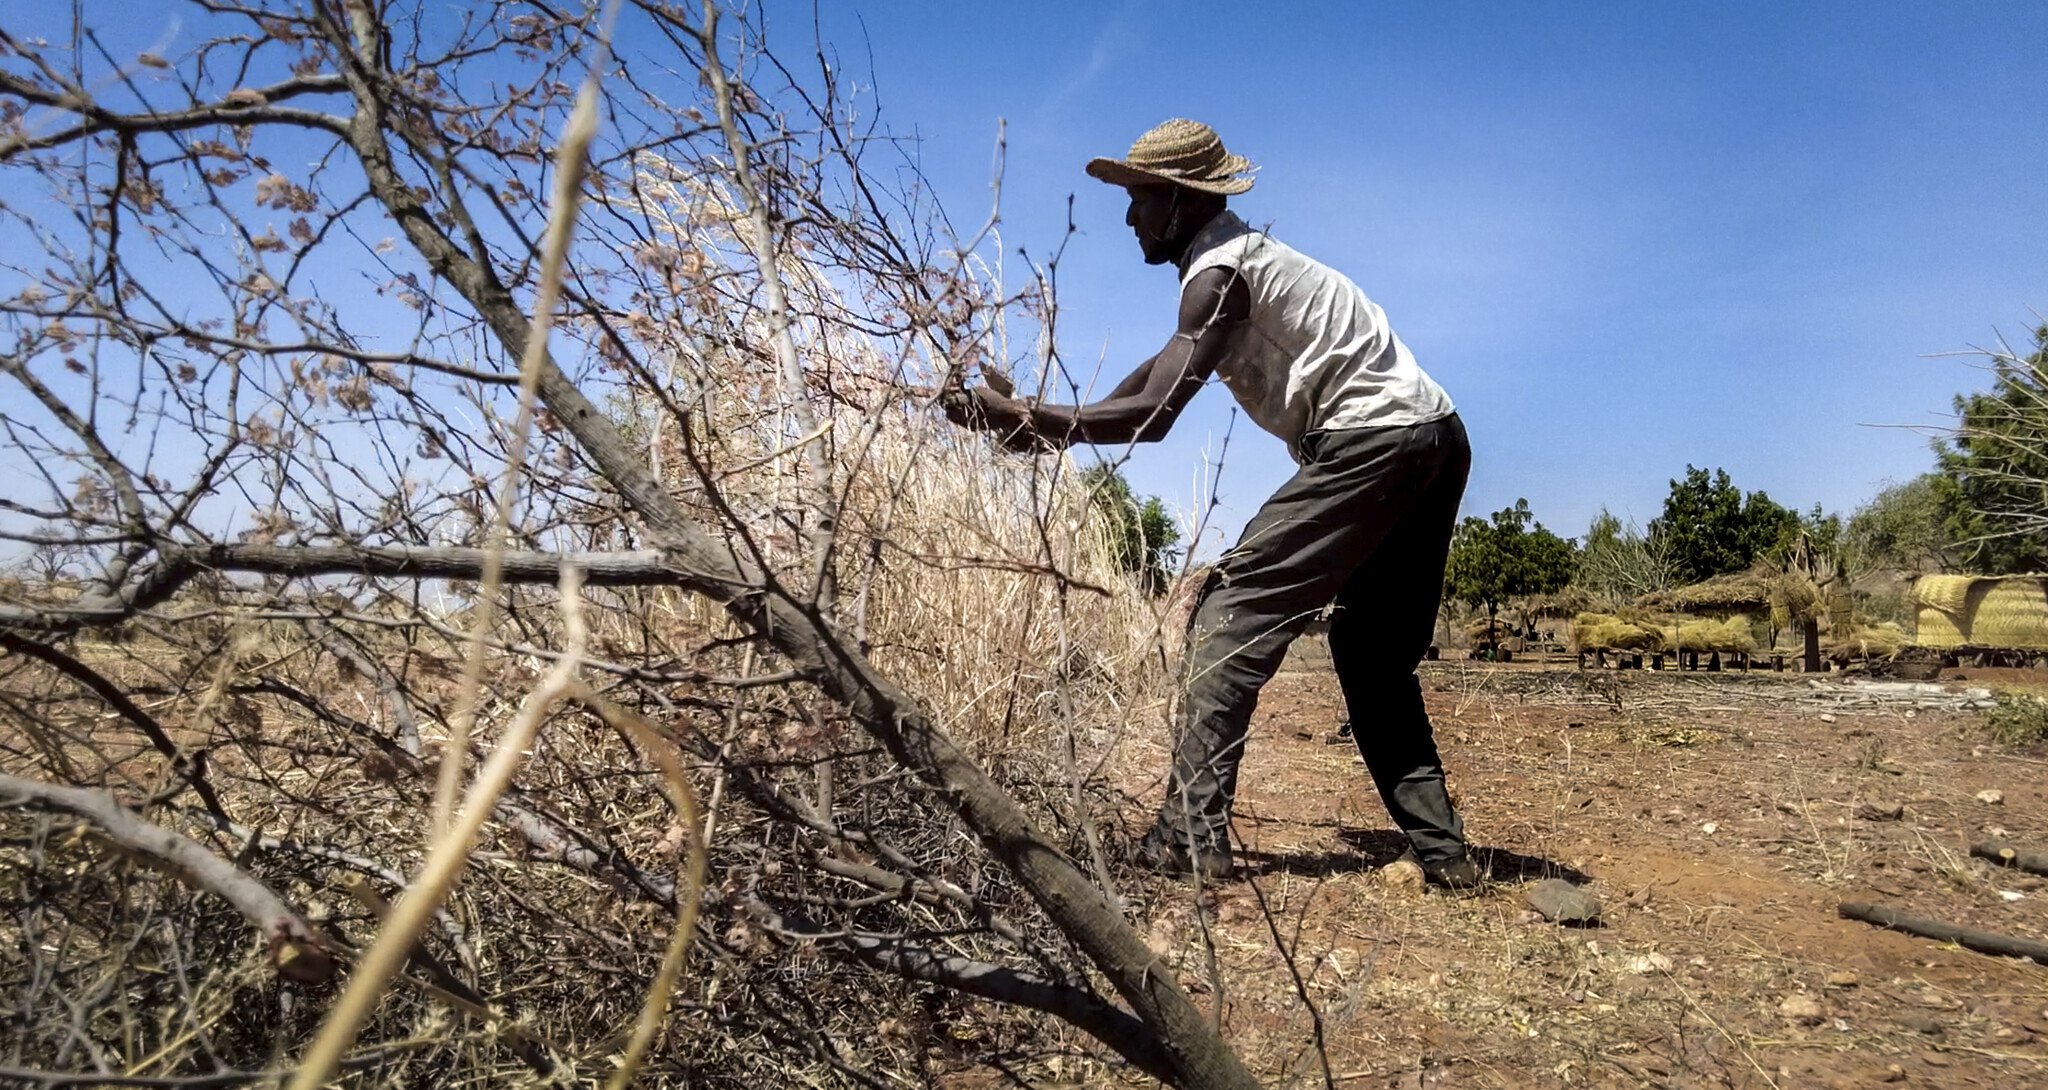 Finding climate solutions to farming in dry times | Oxfam Ireland